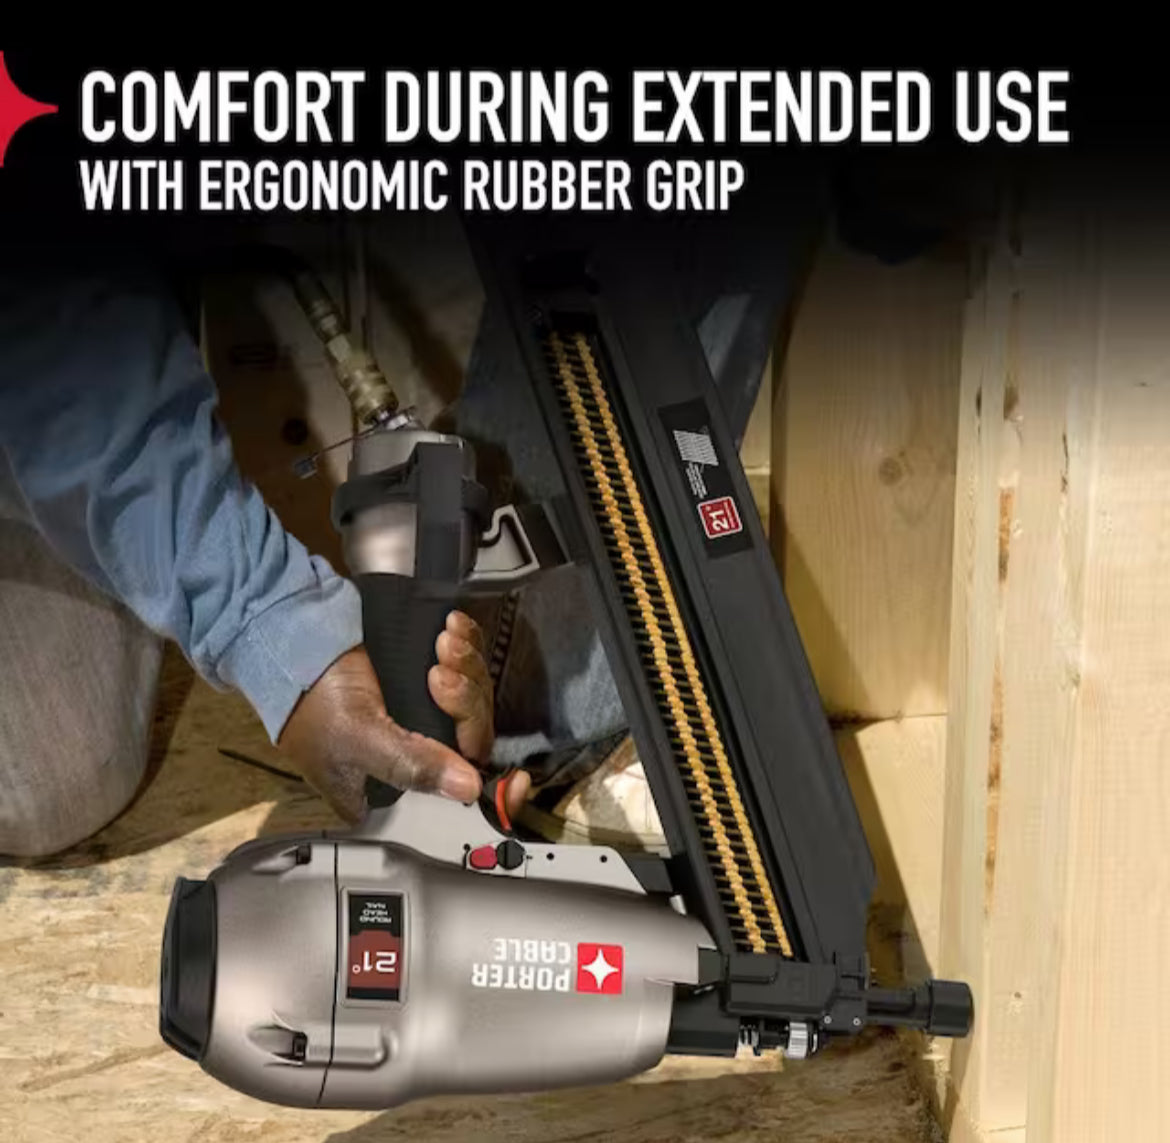 21-Degree 3-1/2 in. Full Round Framing Nailer, Porter Cable